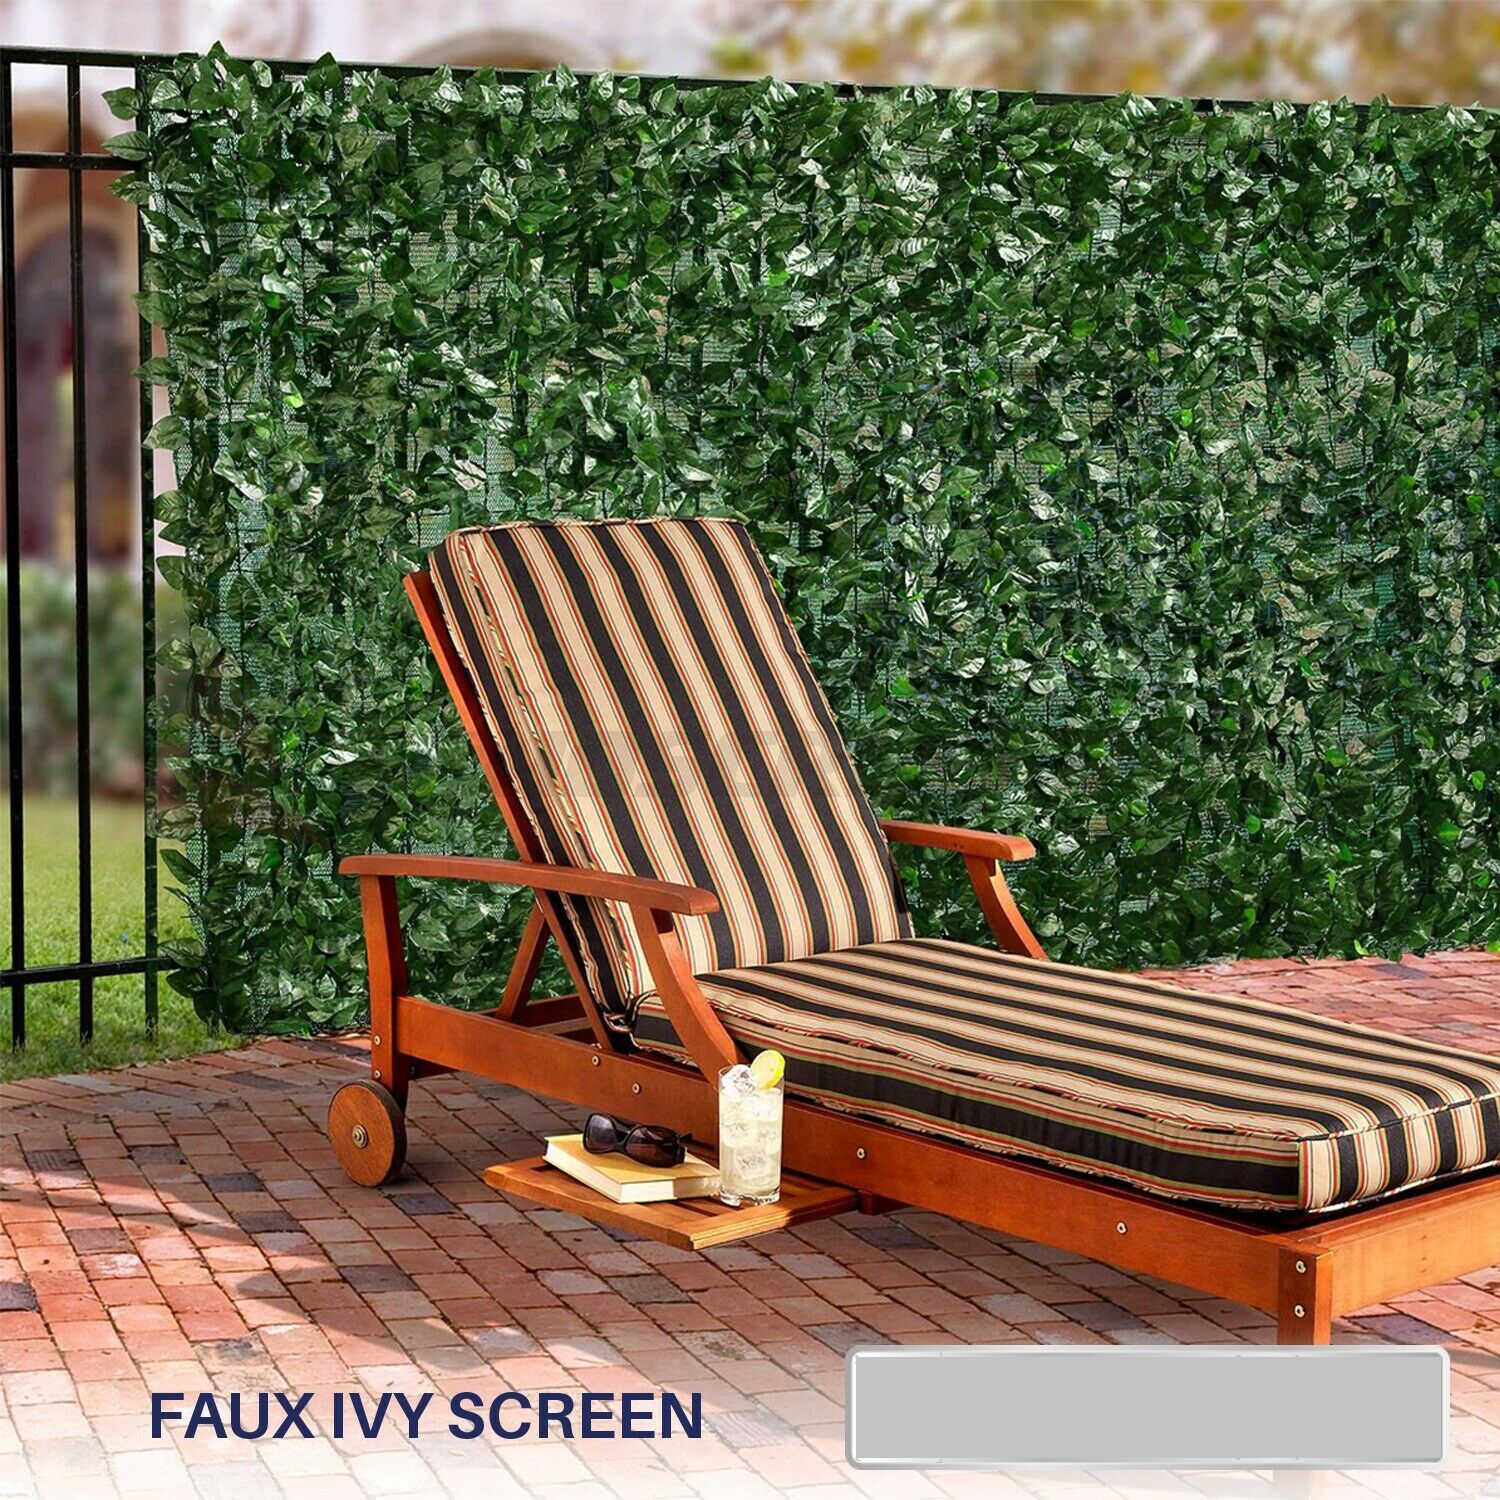 72"(h) Artificial Faux Ivy Leaf Privacy Fence Screen Decor Panels Outdoor Hedge